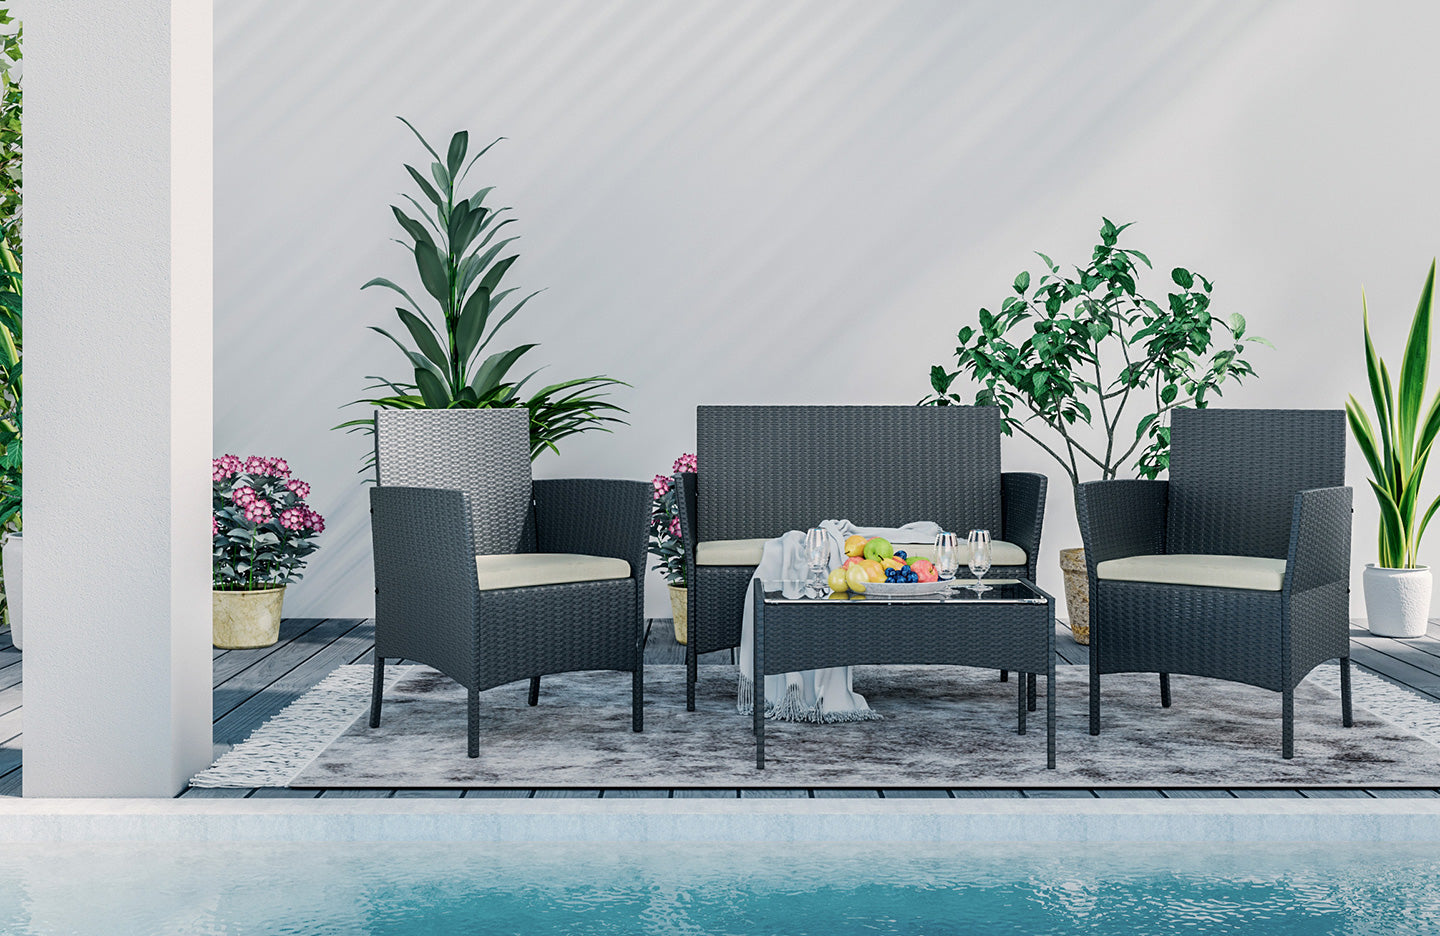 4 Seater Rattan Garden Furniture Set with 2 Single Chairs, 1 Double Sofa and 1 Table